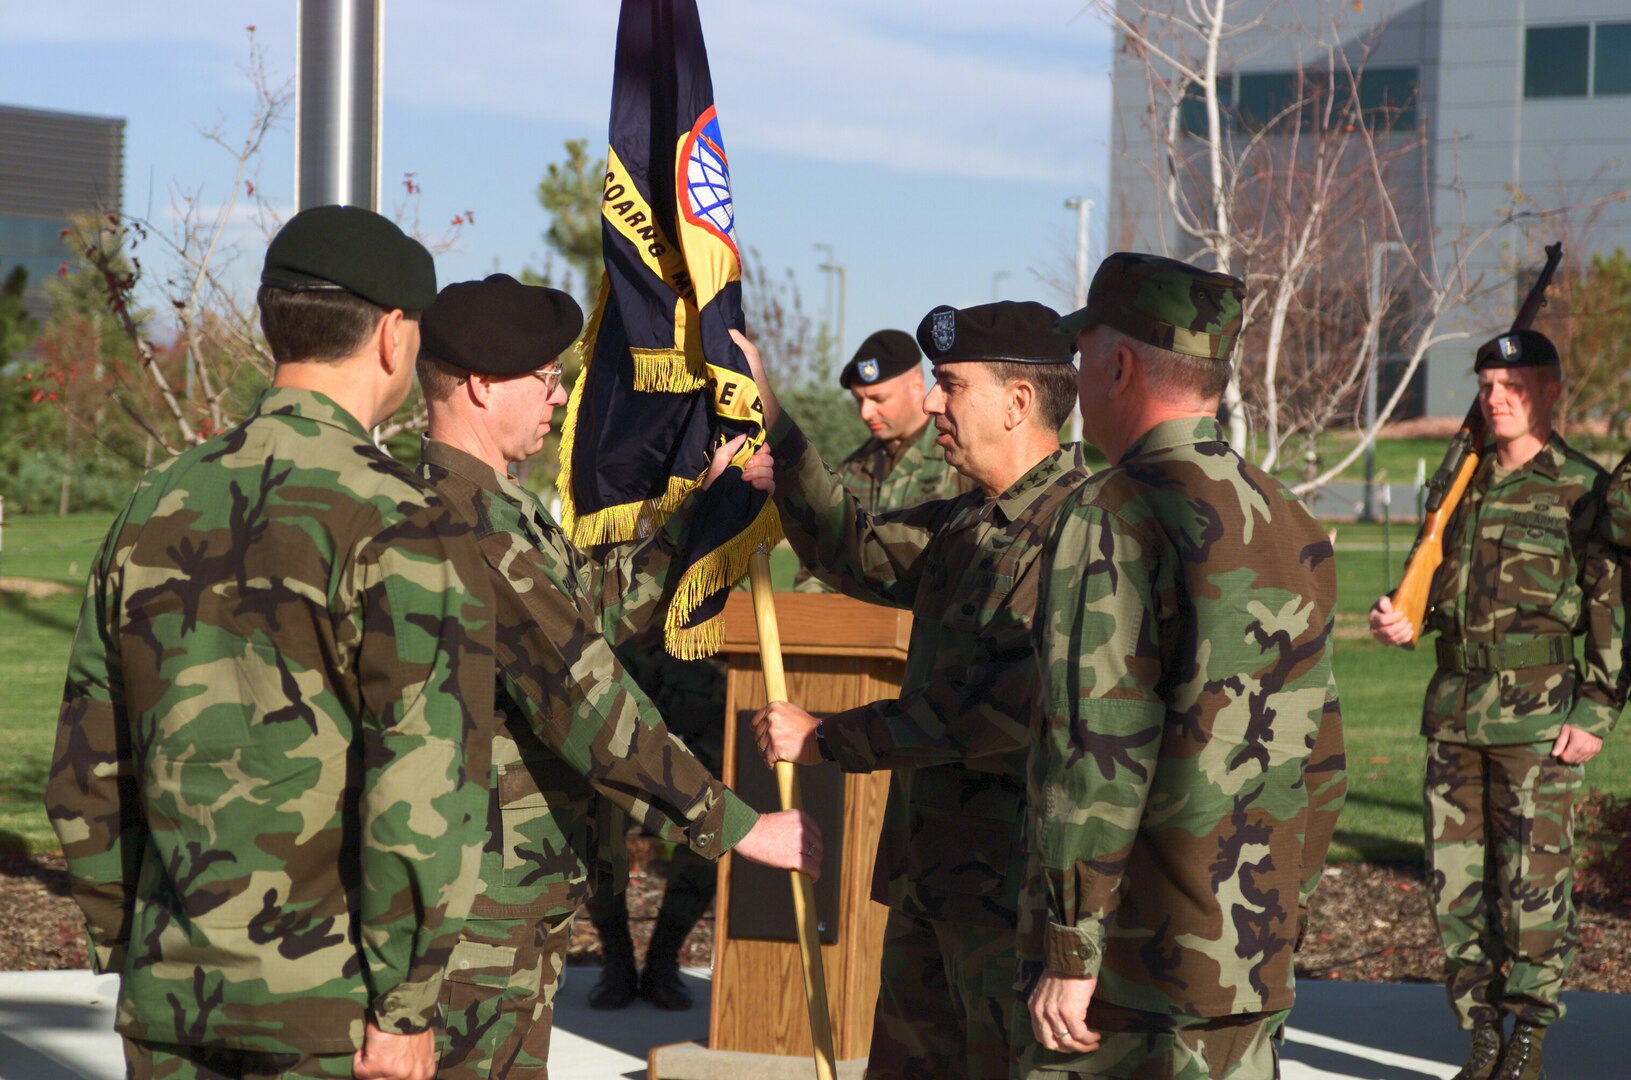 U.S. Army Col. Gary Baumann, left, the first commander of the 100th Missile Defense Brigade, accepts the brigade's flag from U.S. Army Lt. Gen. Joseph M. Cosumano, Jr., commanding general, U.S. Army Space and Missile Defense Command, during the activation ceremony of the 100th MDB Oct. 16, 2003, at Peterson Air Force Base, Colorado. The MDB is manned both by Colorado Army National Guard and active-component soldiers.